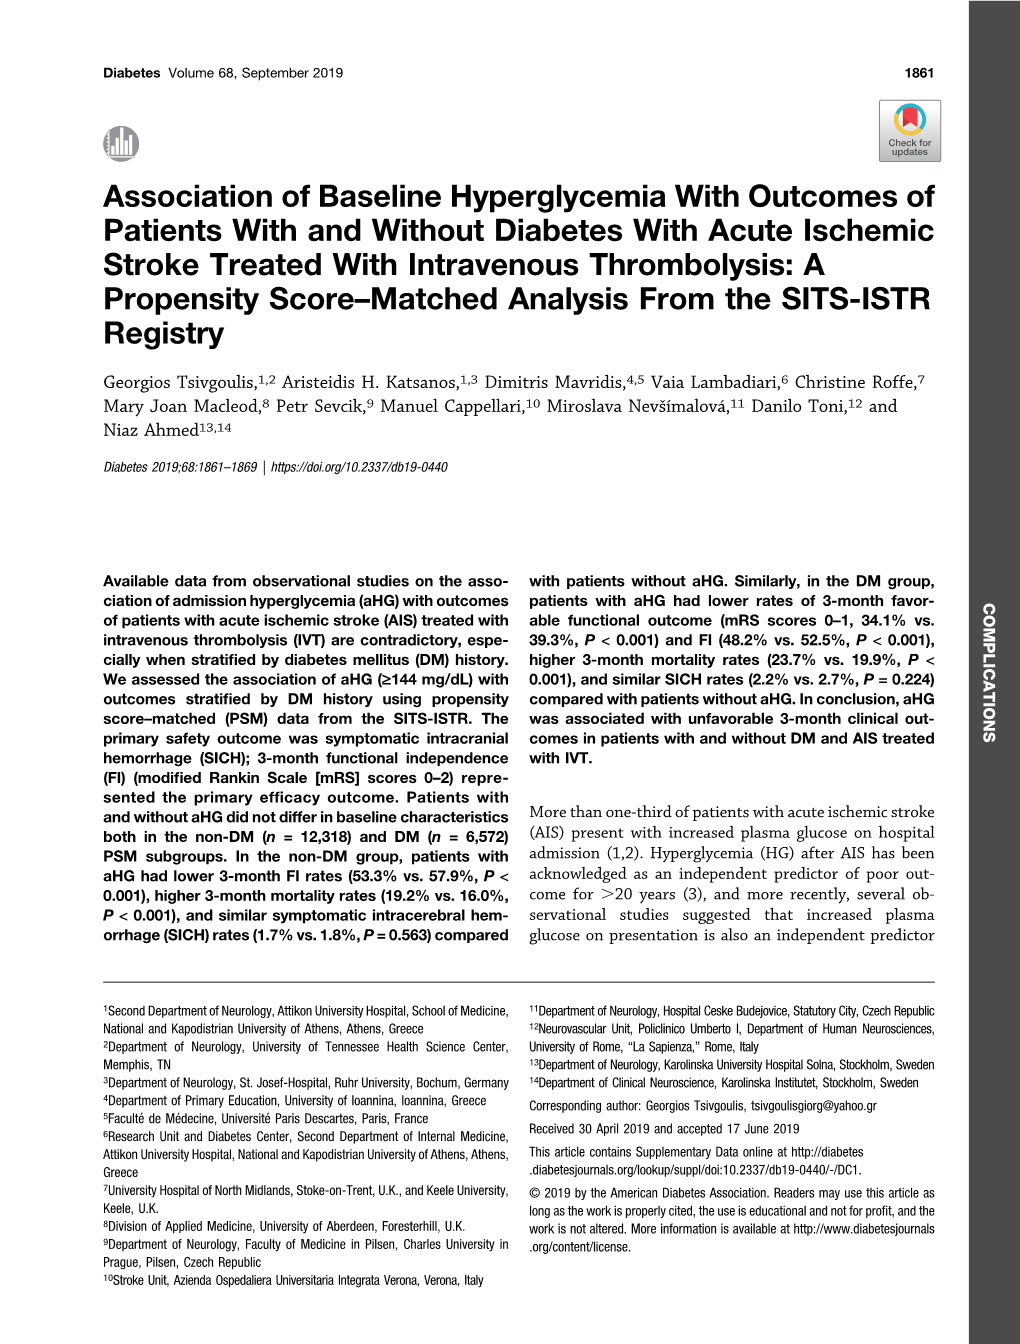 Association of Baseline Hyperglycemia with Outcomes Of